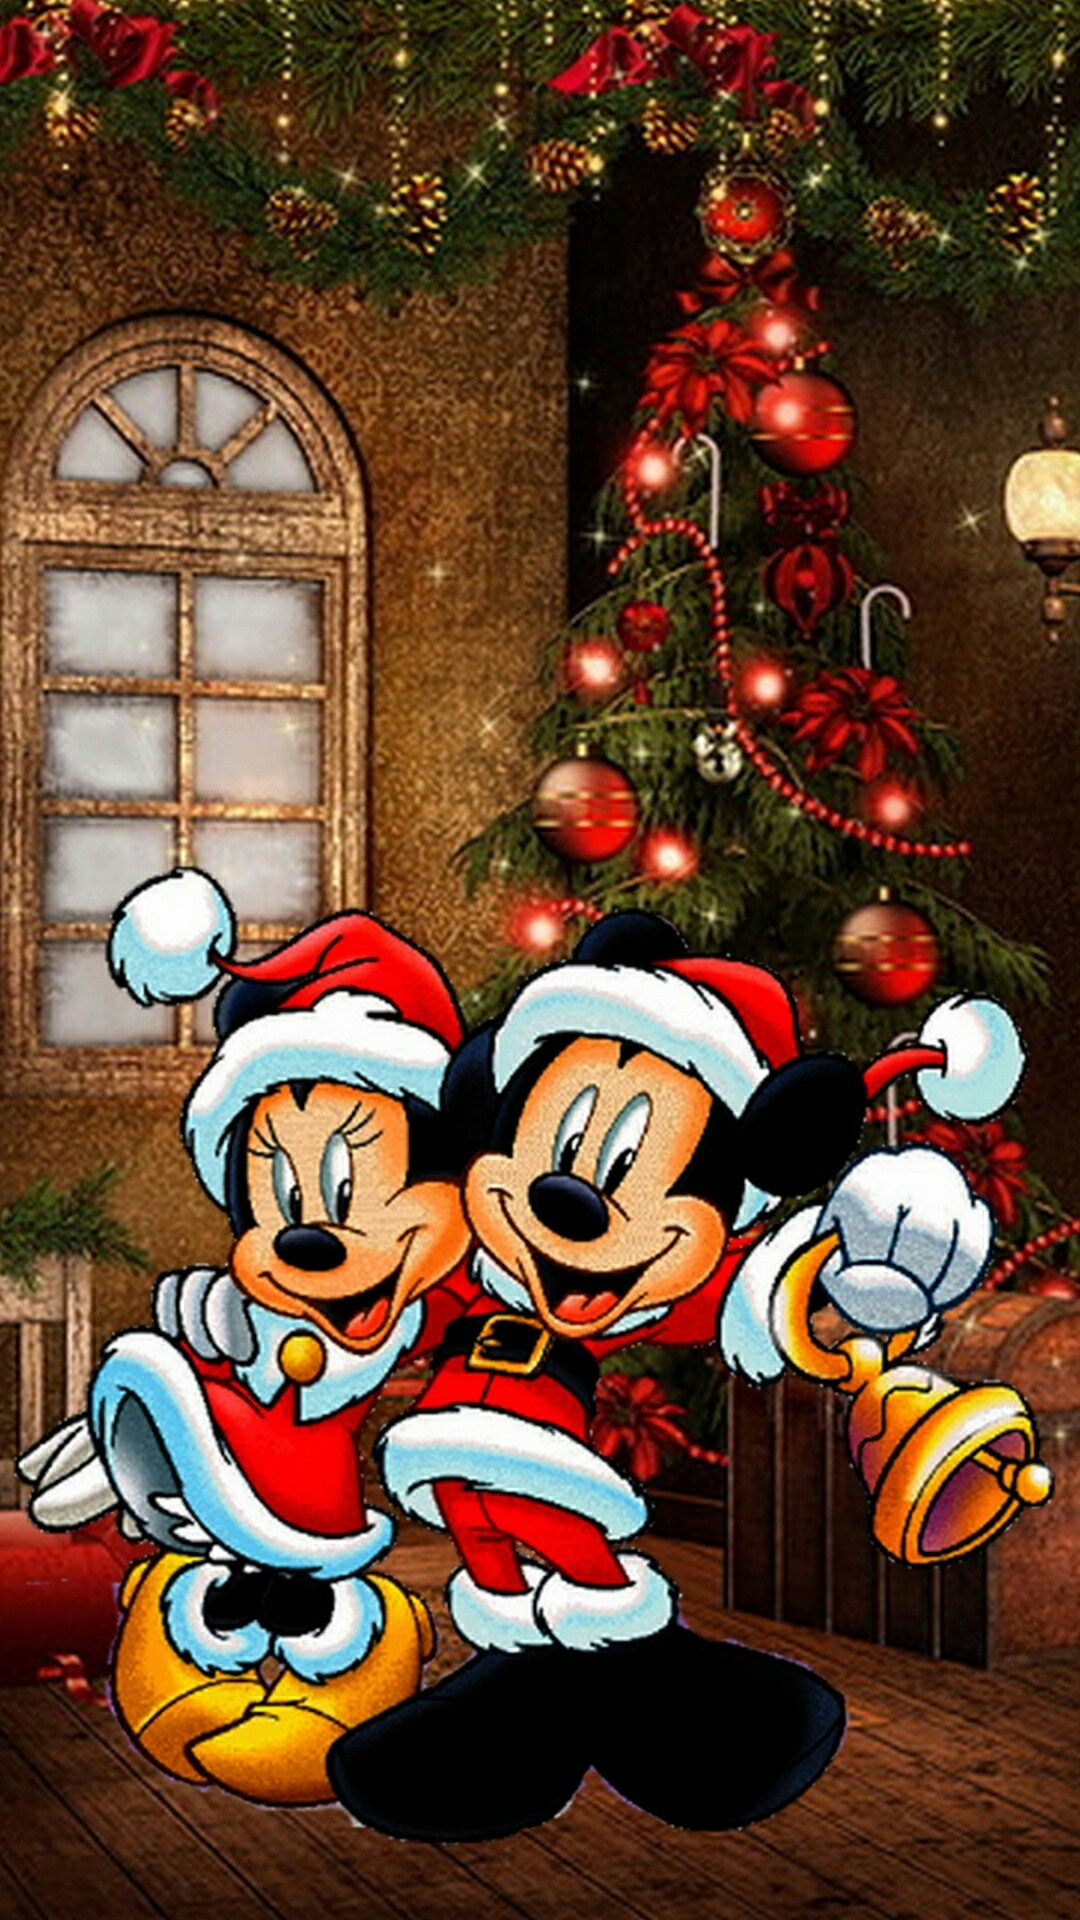 1080x1920 Holiday Wallpaper, Wallpaper Backgrounds, Walt Disney Mickey Mouse, Disney  Cruise/plan, Minnie Mouse, Merry Christmas, Decoupage, Noel, Colors